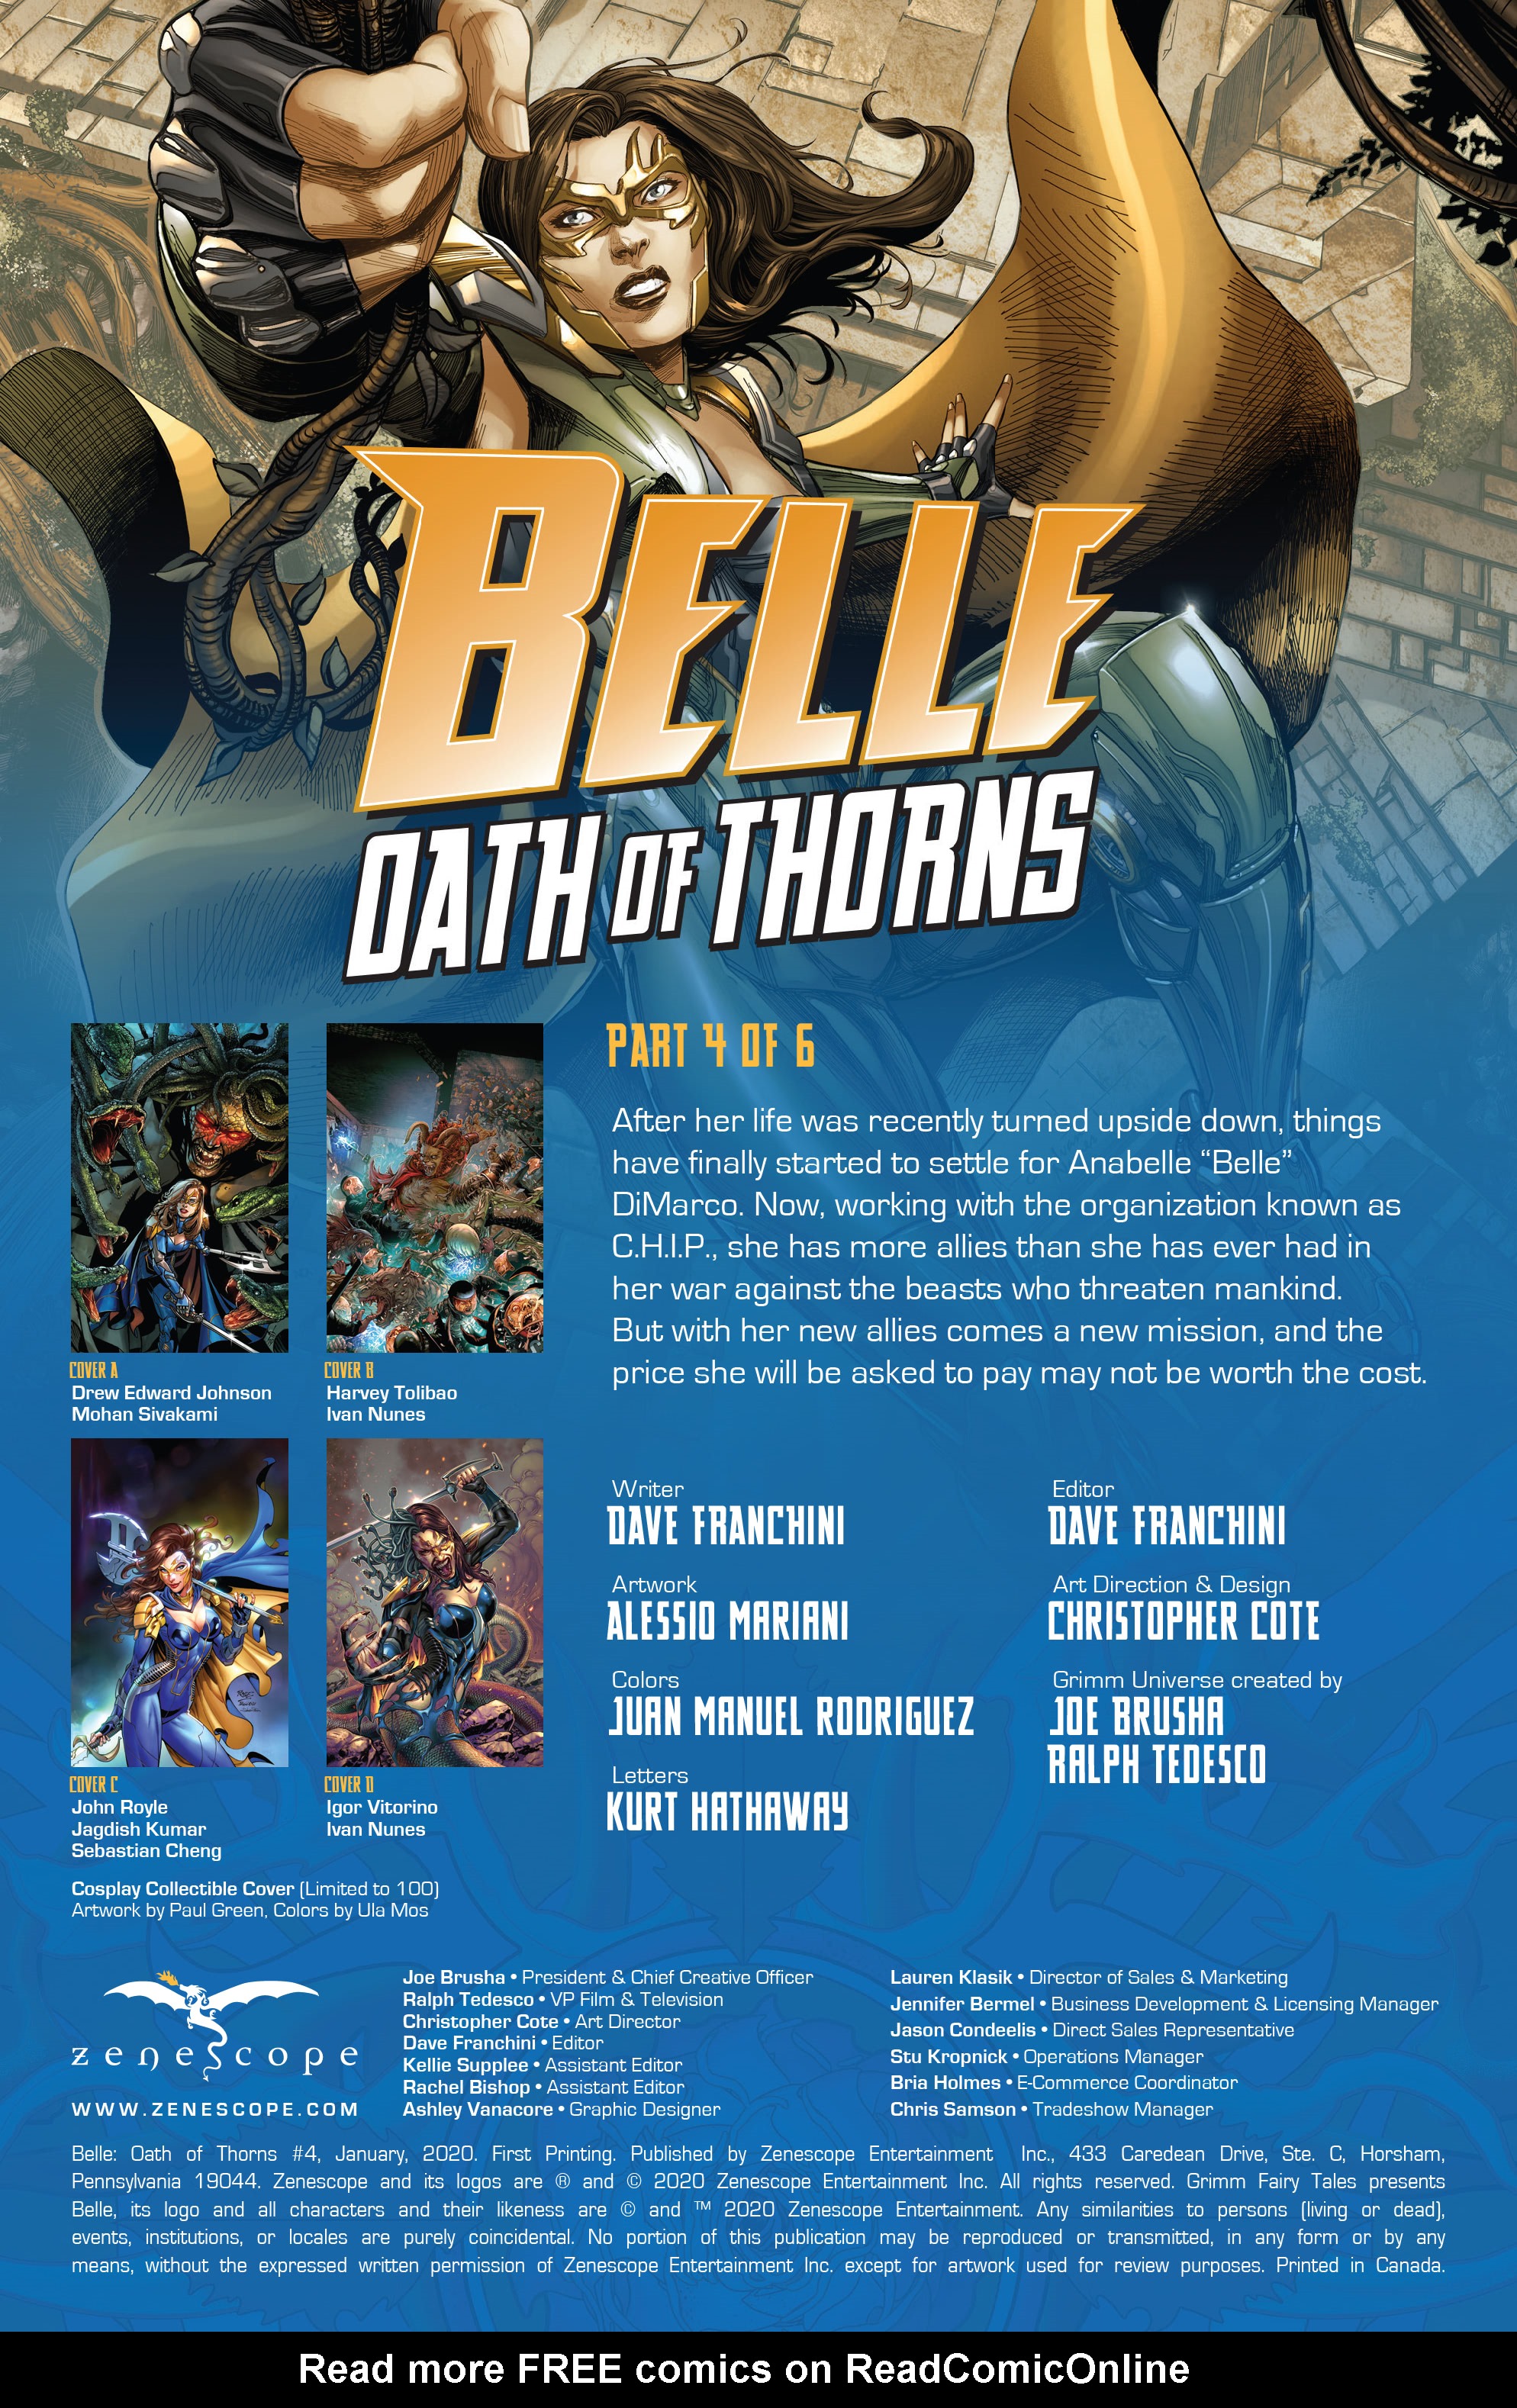 Read online Belle: Oath of Thorns comic -  Issue #4 - 2